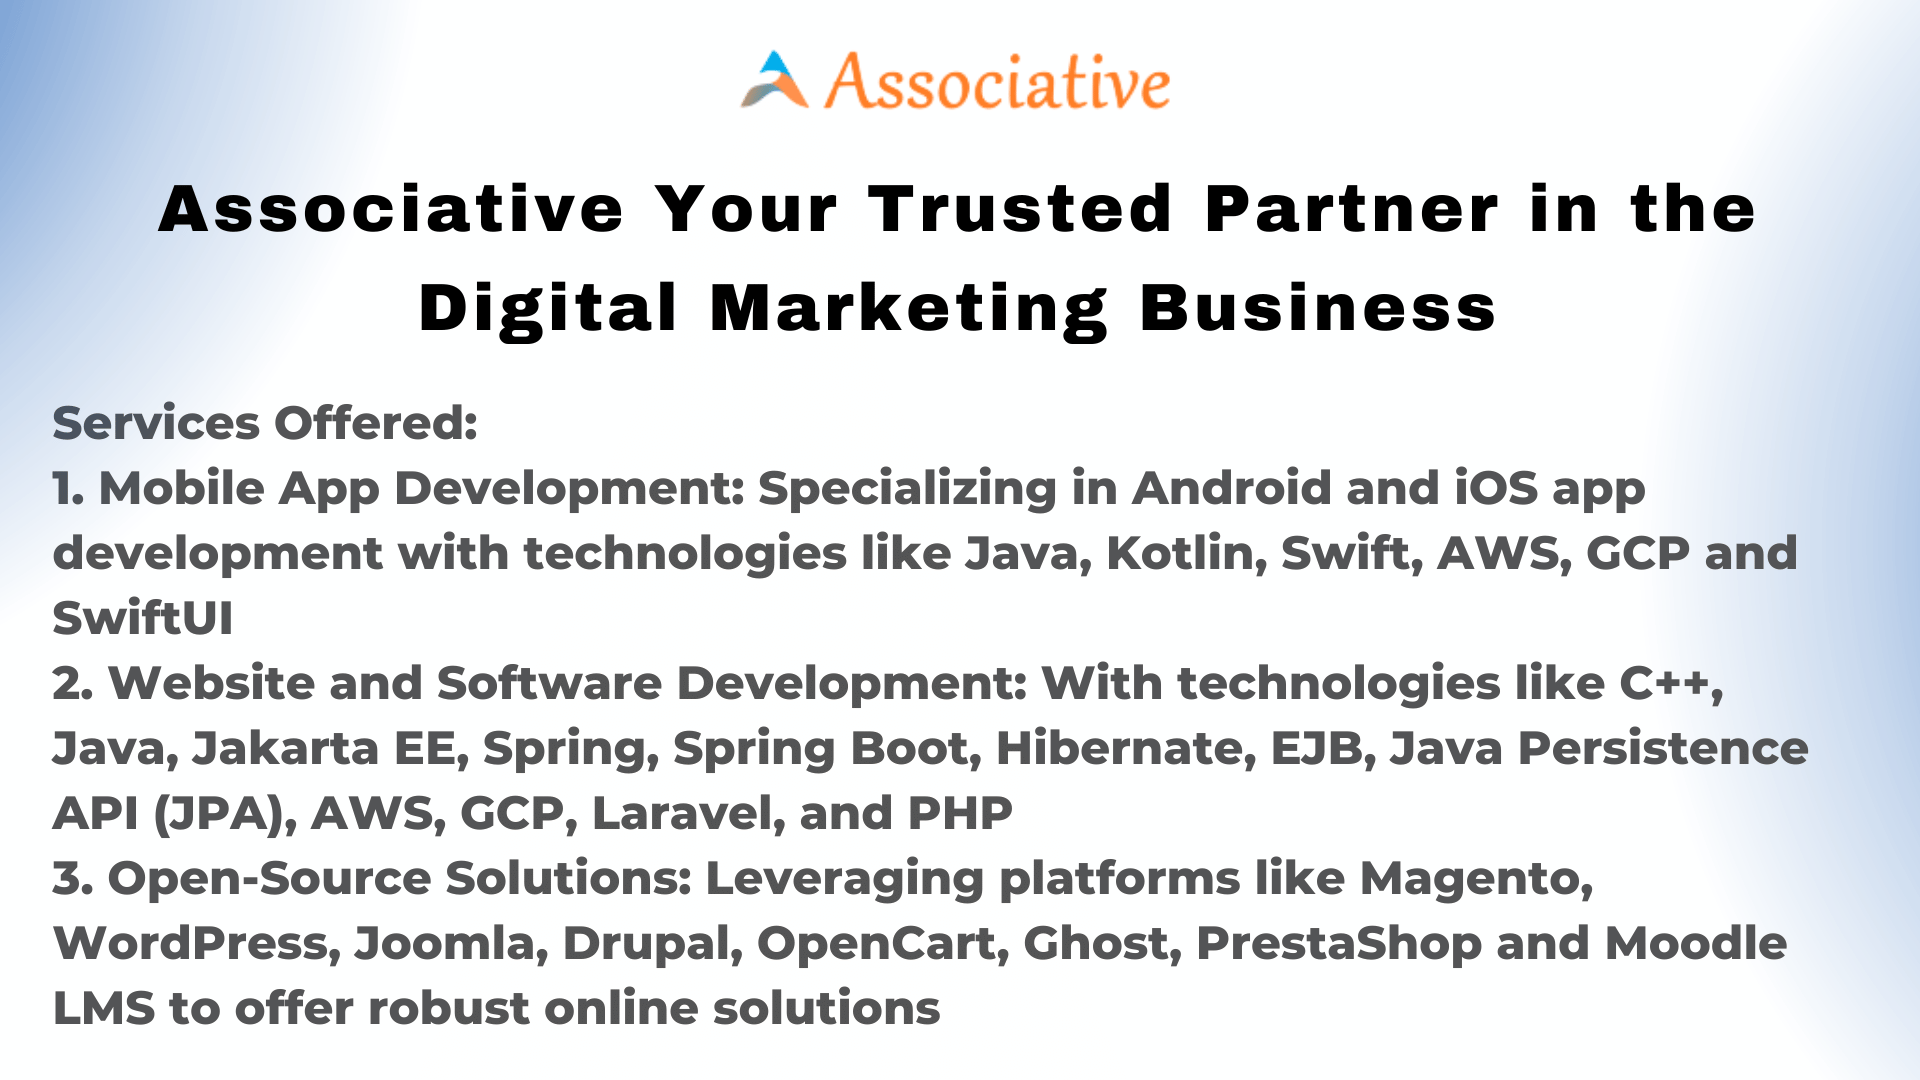 Associative Your Trusted Partner in the Digital Marketing Business